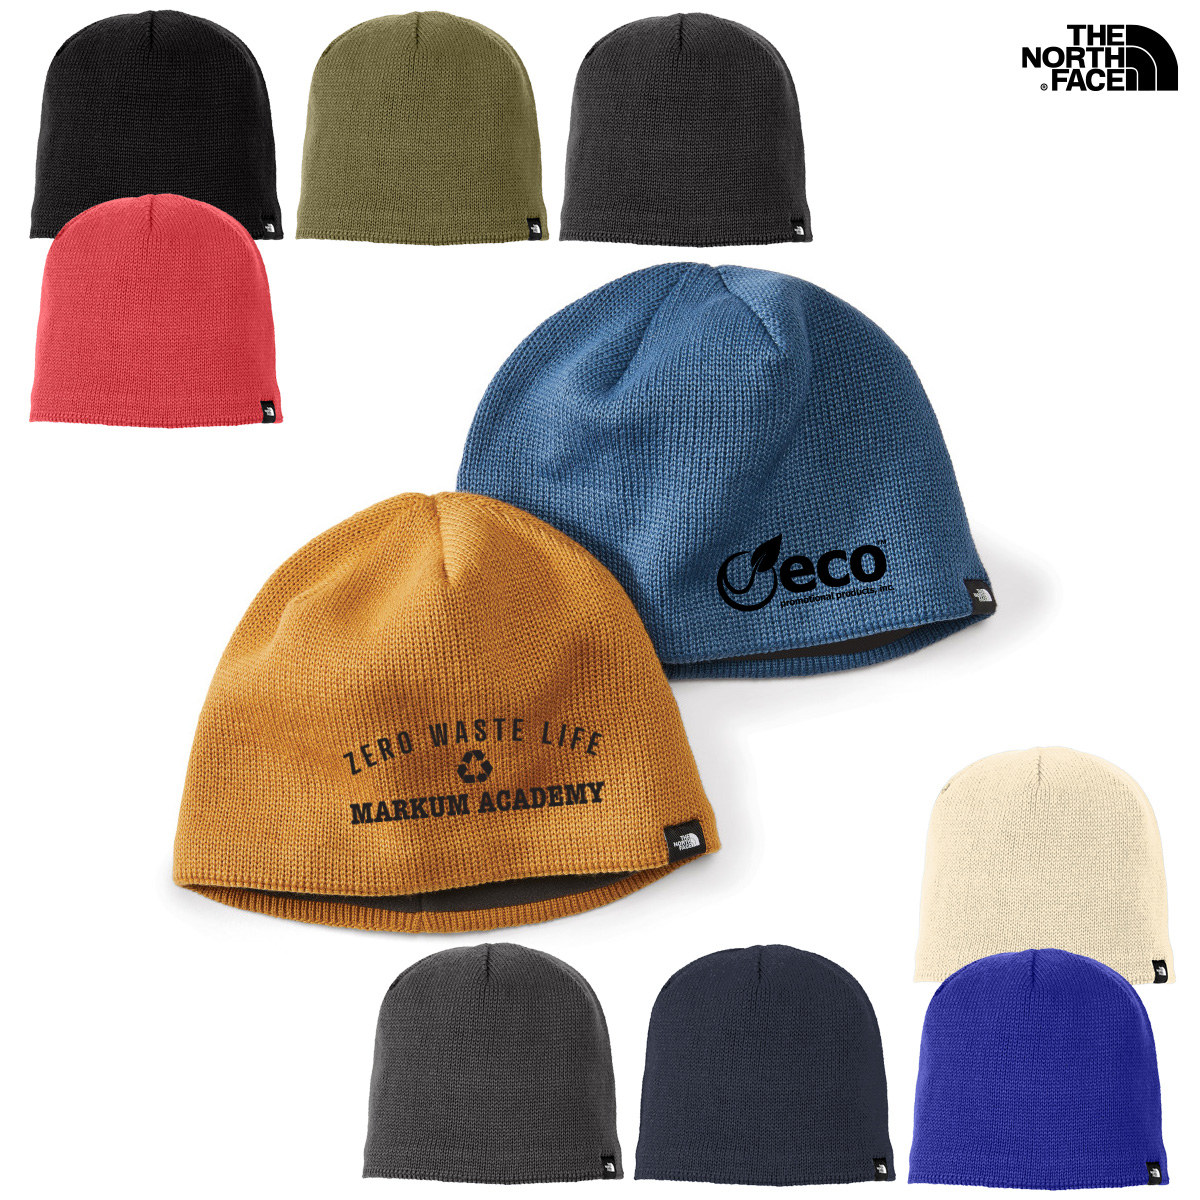 The North Face® fleece lined beanie in various colors